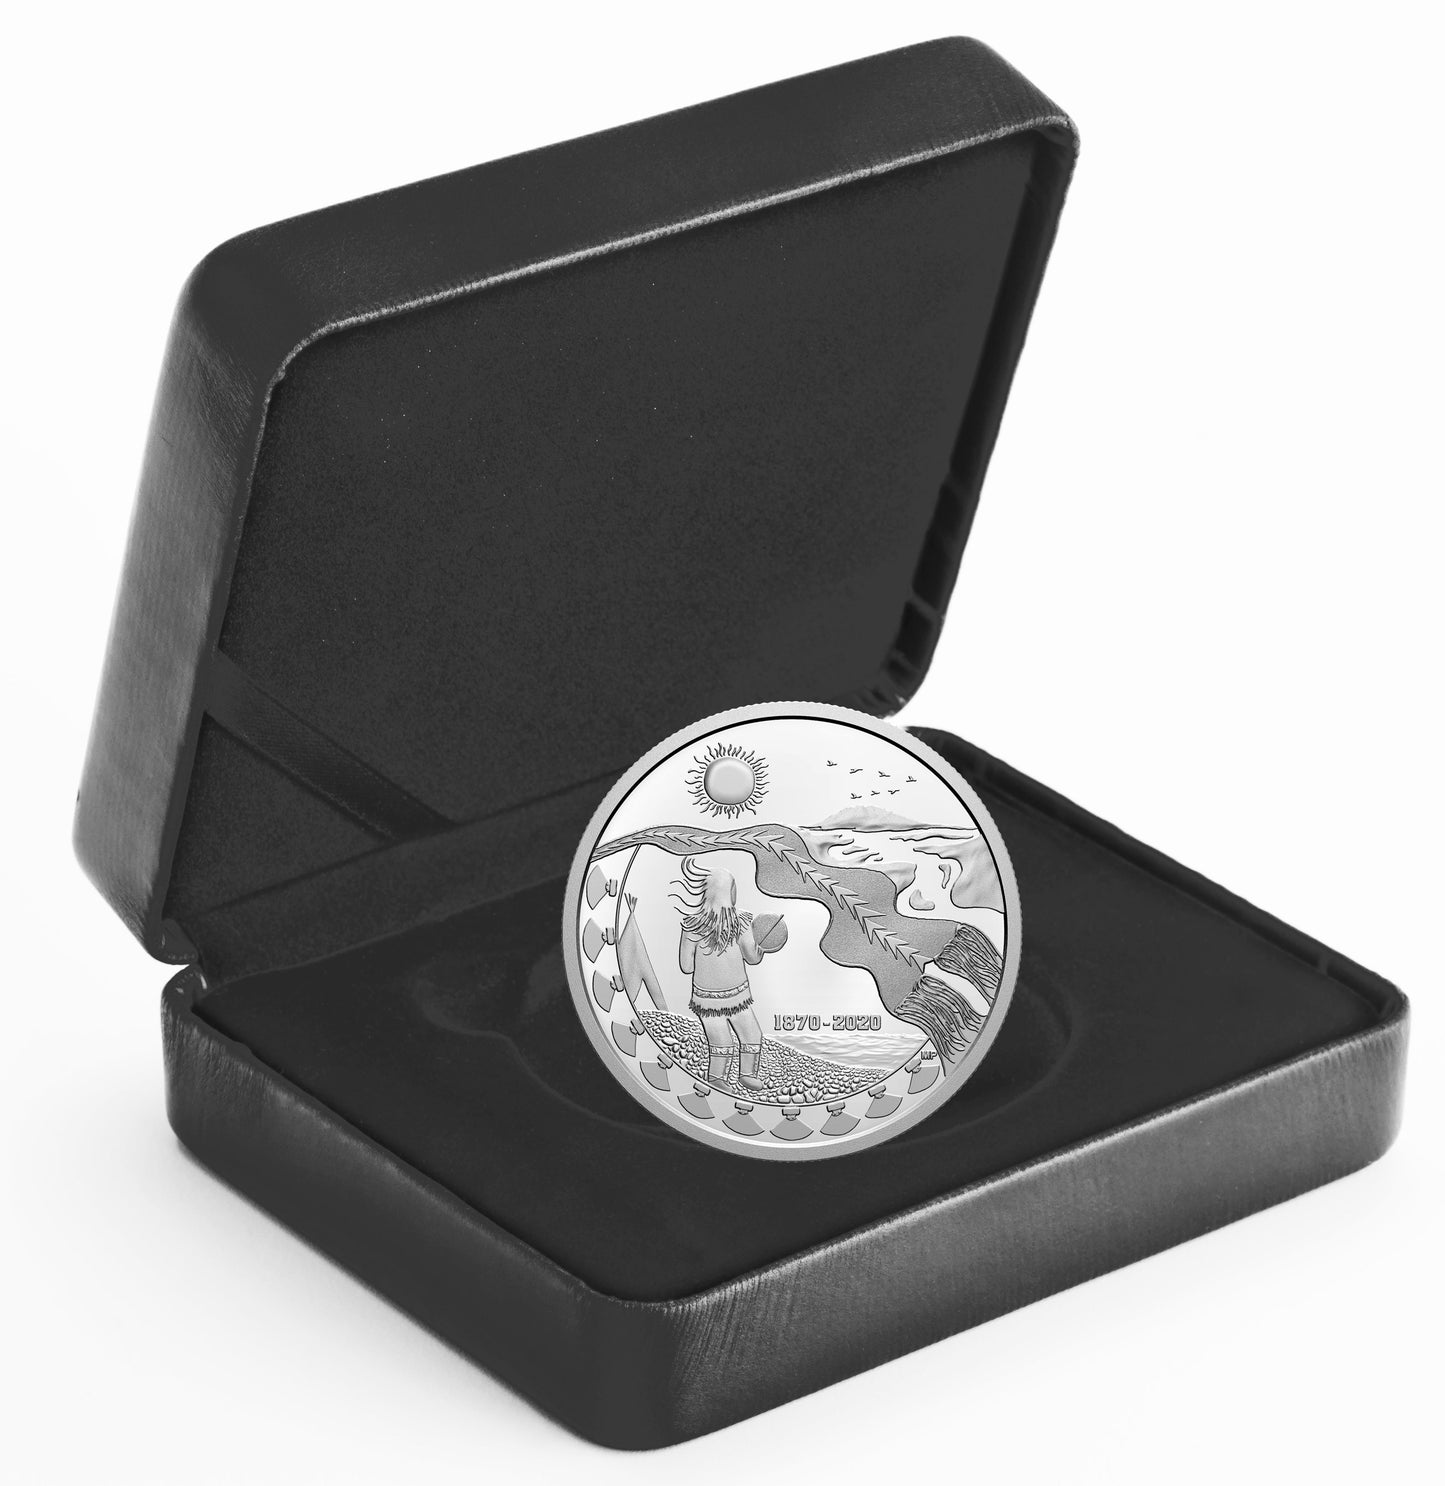 150th Anniversary of Northwest Territories - 2020 Canada 2 oz Pure Silver Coin - Royal Canadian Mint